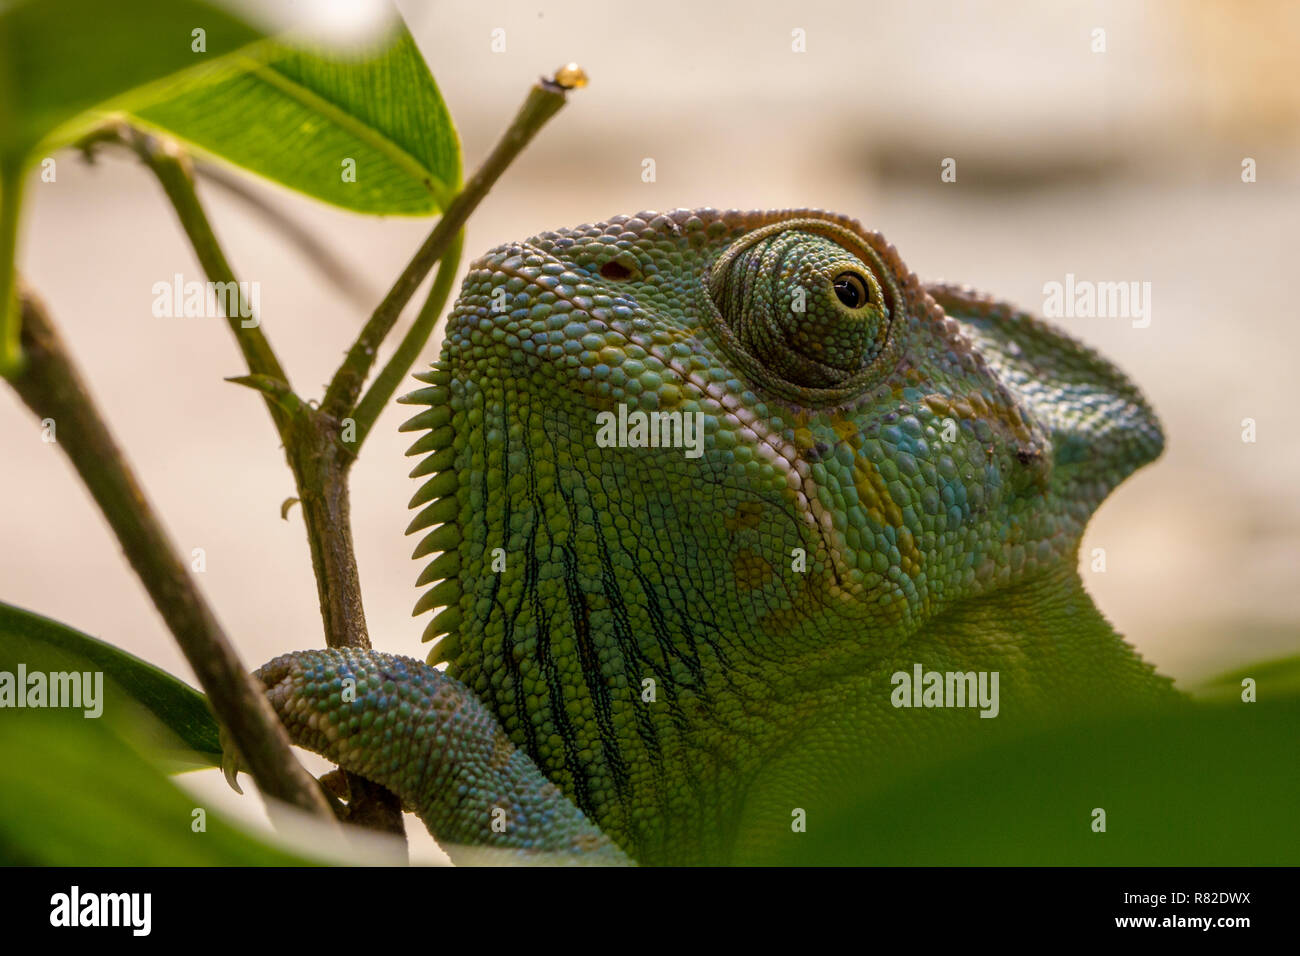 Chameleons are adapted for climbing and visual hunting. They live in warm habitats that range from rain forest to desert conditions, with various spec Stock Photo